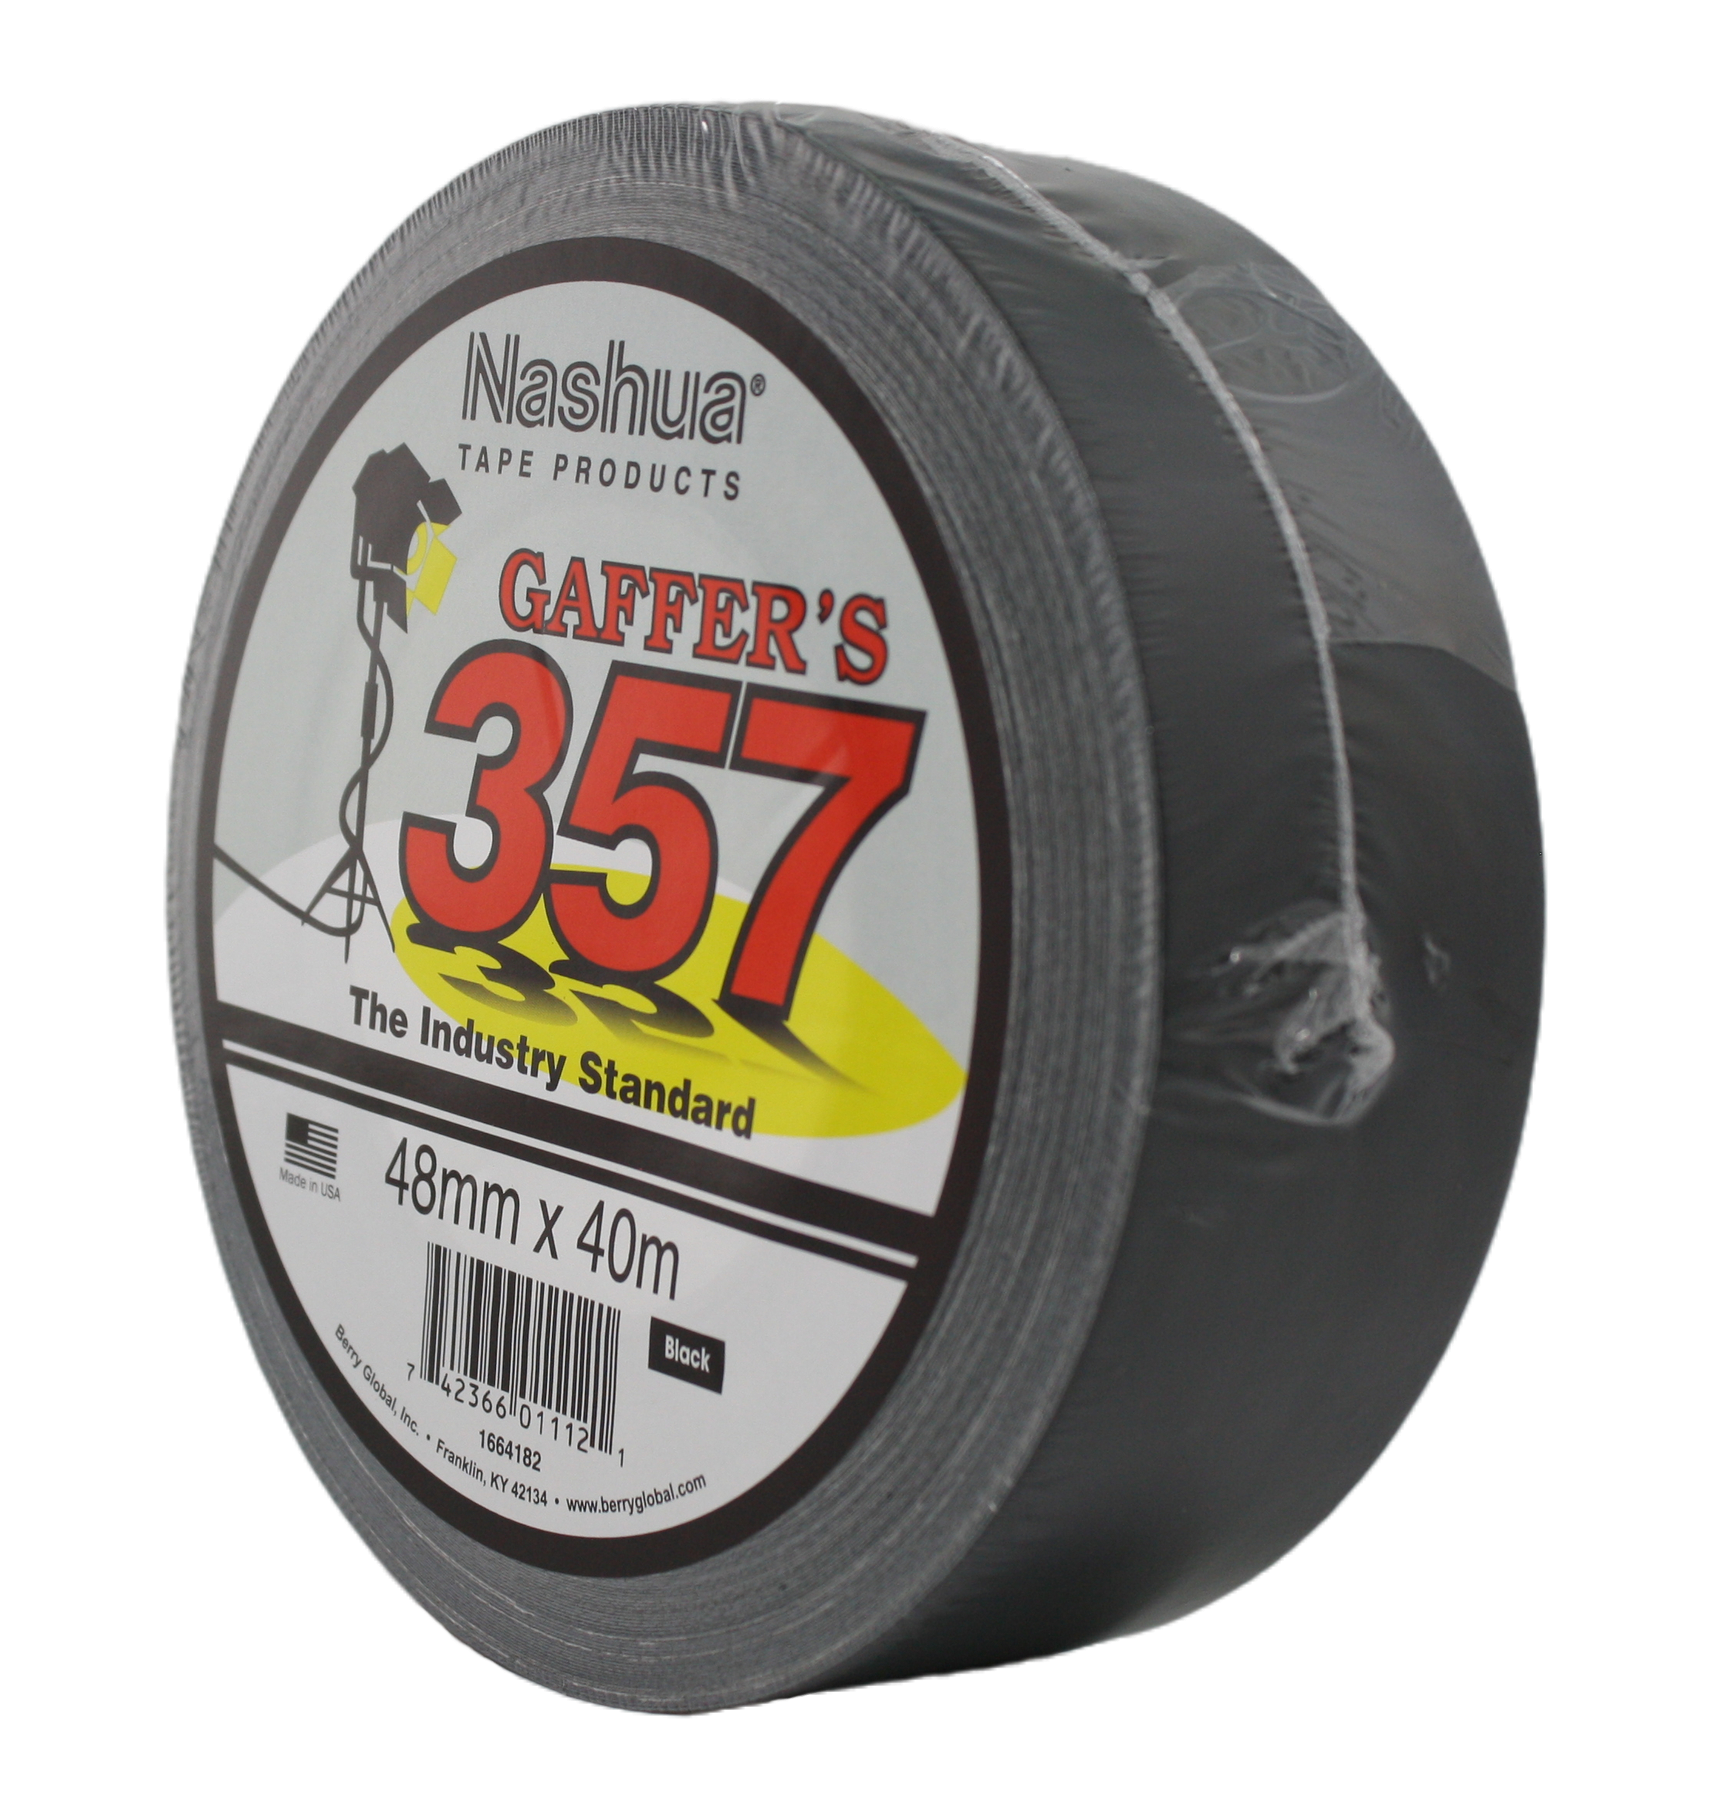 Nashua 357 black, side view (with label and packaging)